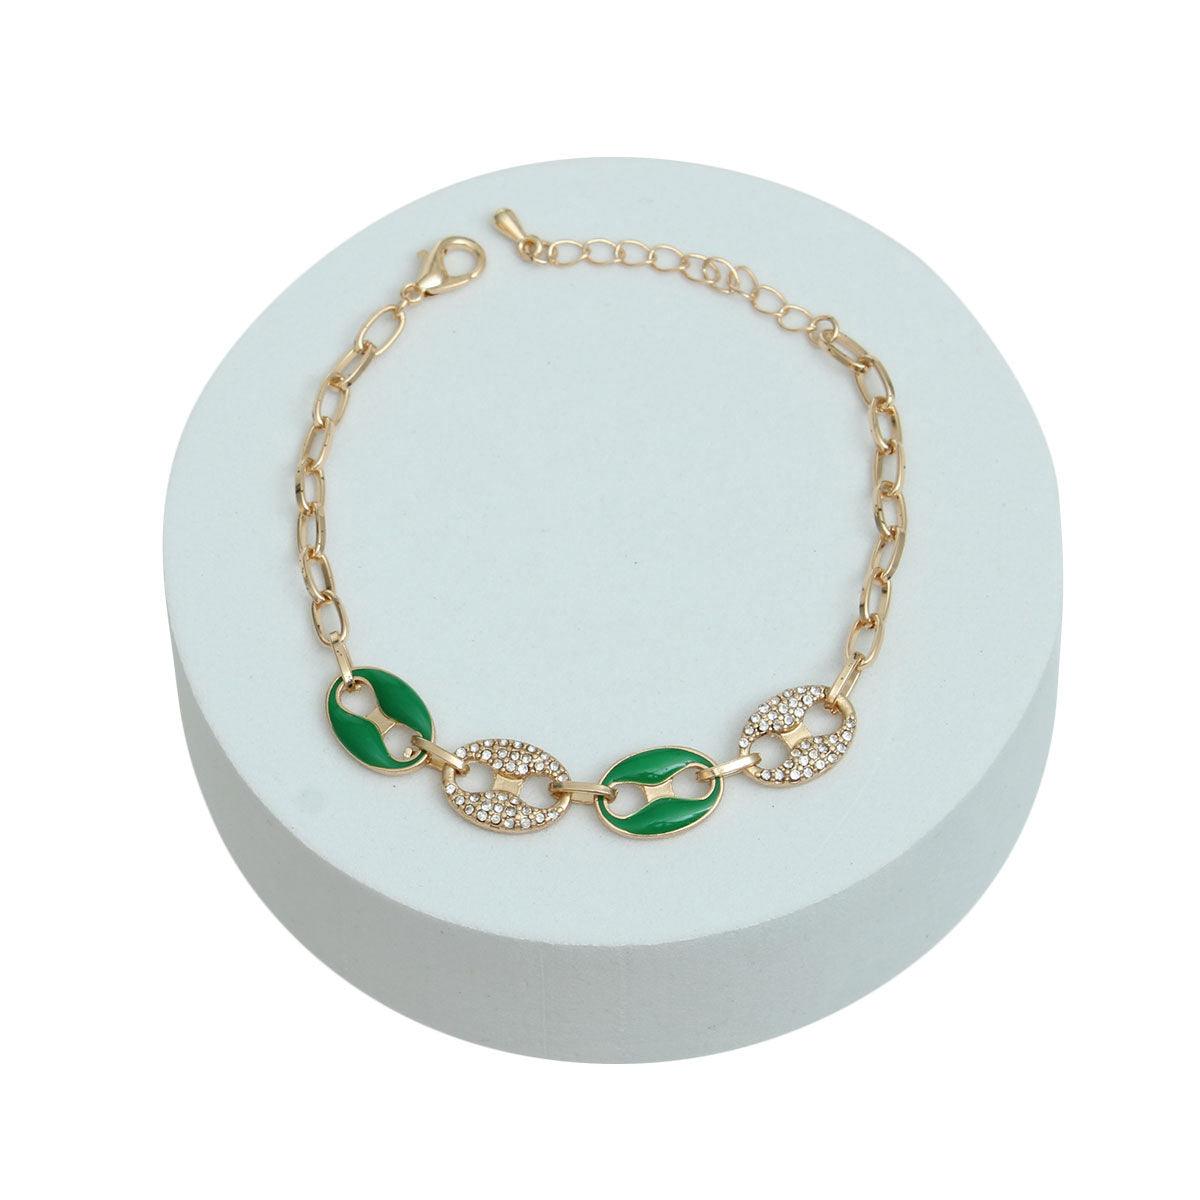 Eye-Catching Matelot Chain Bracelet in Green and Gold Color